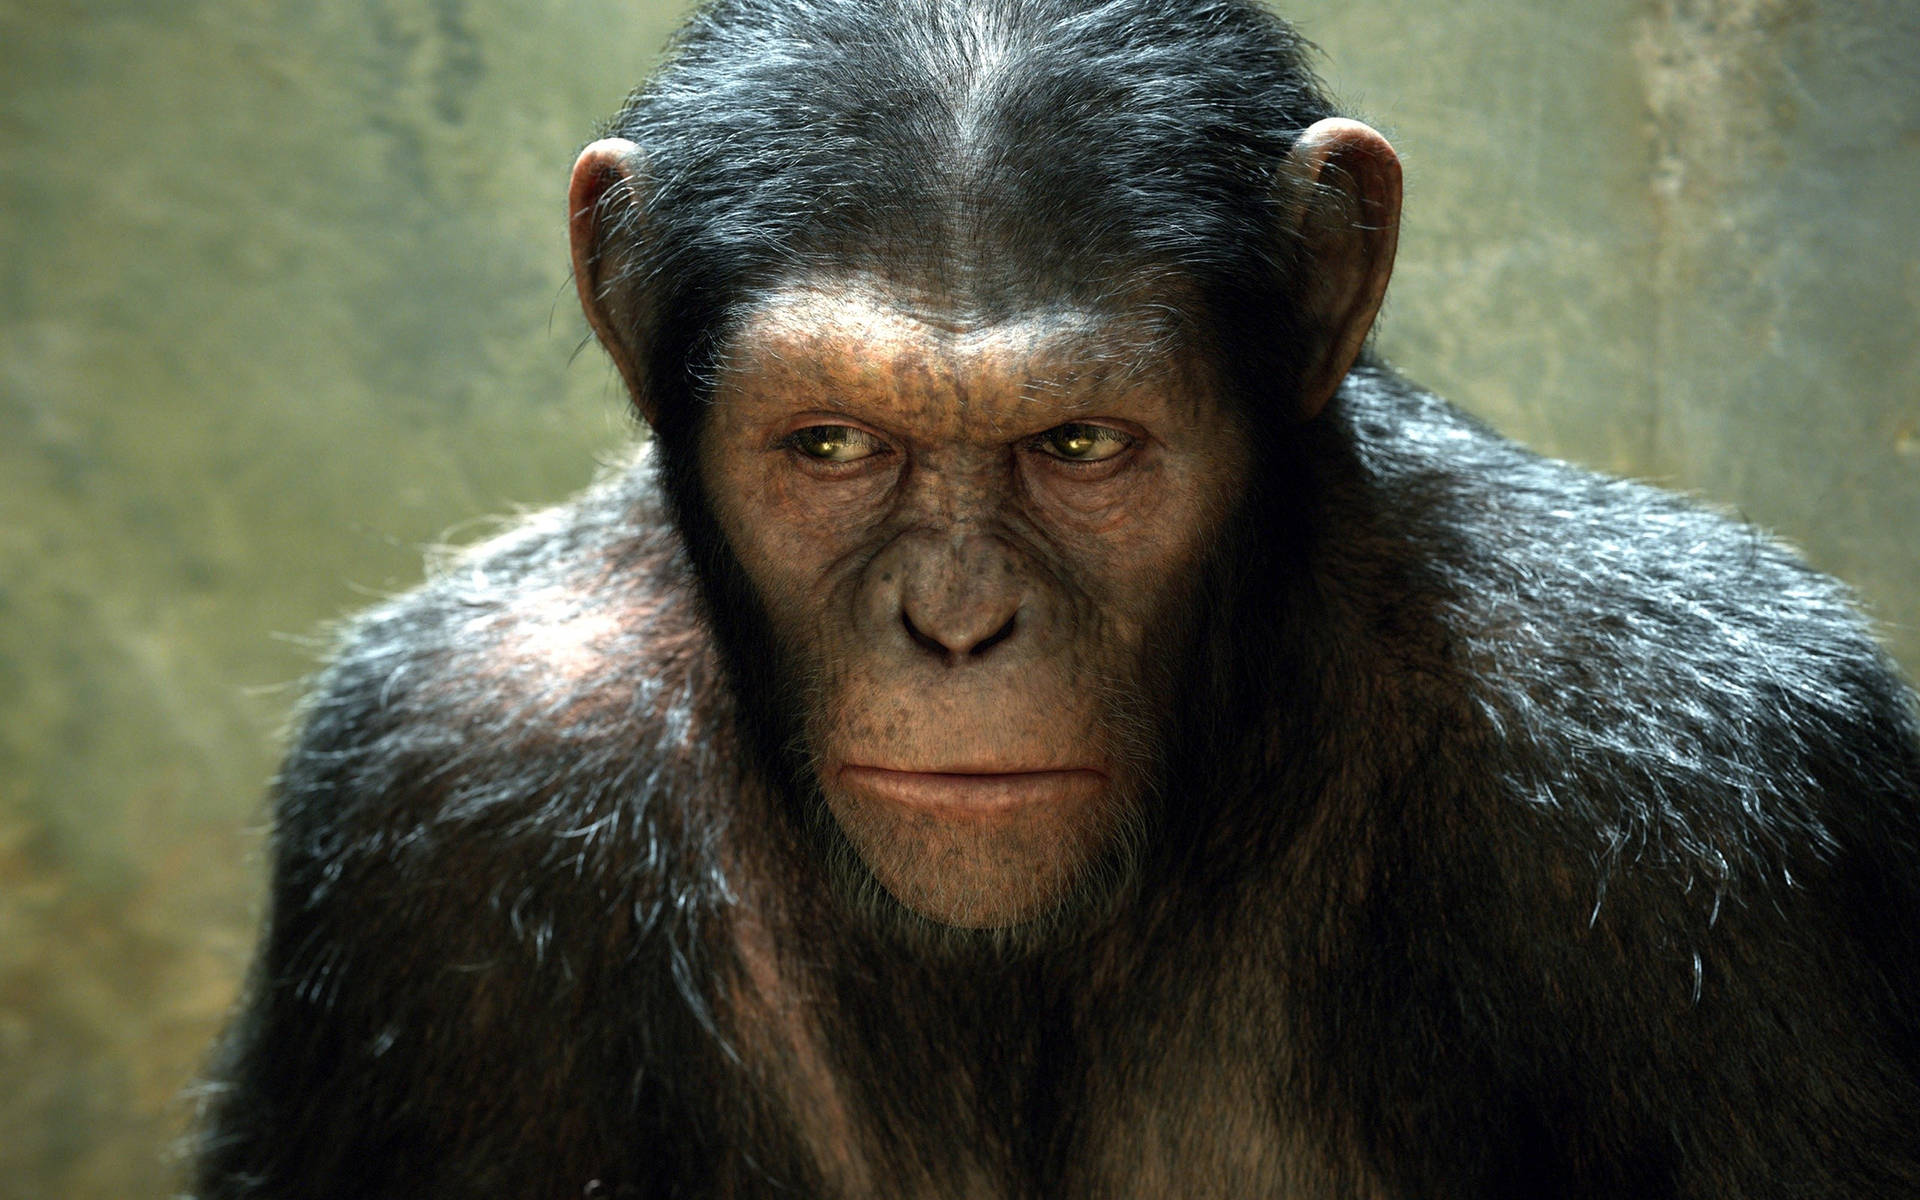 Planetof The Apes Caesar Protagonist - Planeten Av Apor Caesar Protagonist (as A Suggestion For A Computer Or Mobile Wallpaper) Wallpaper